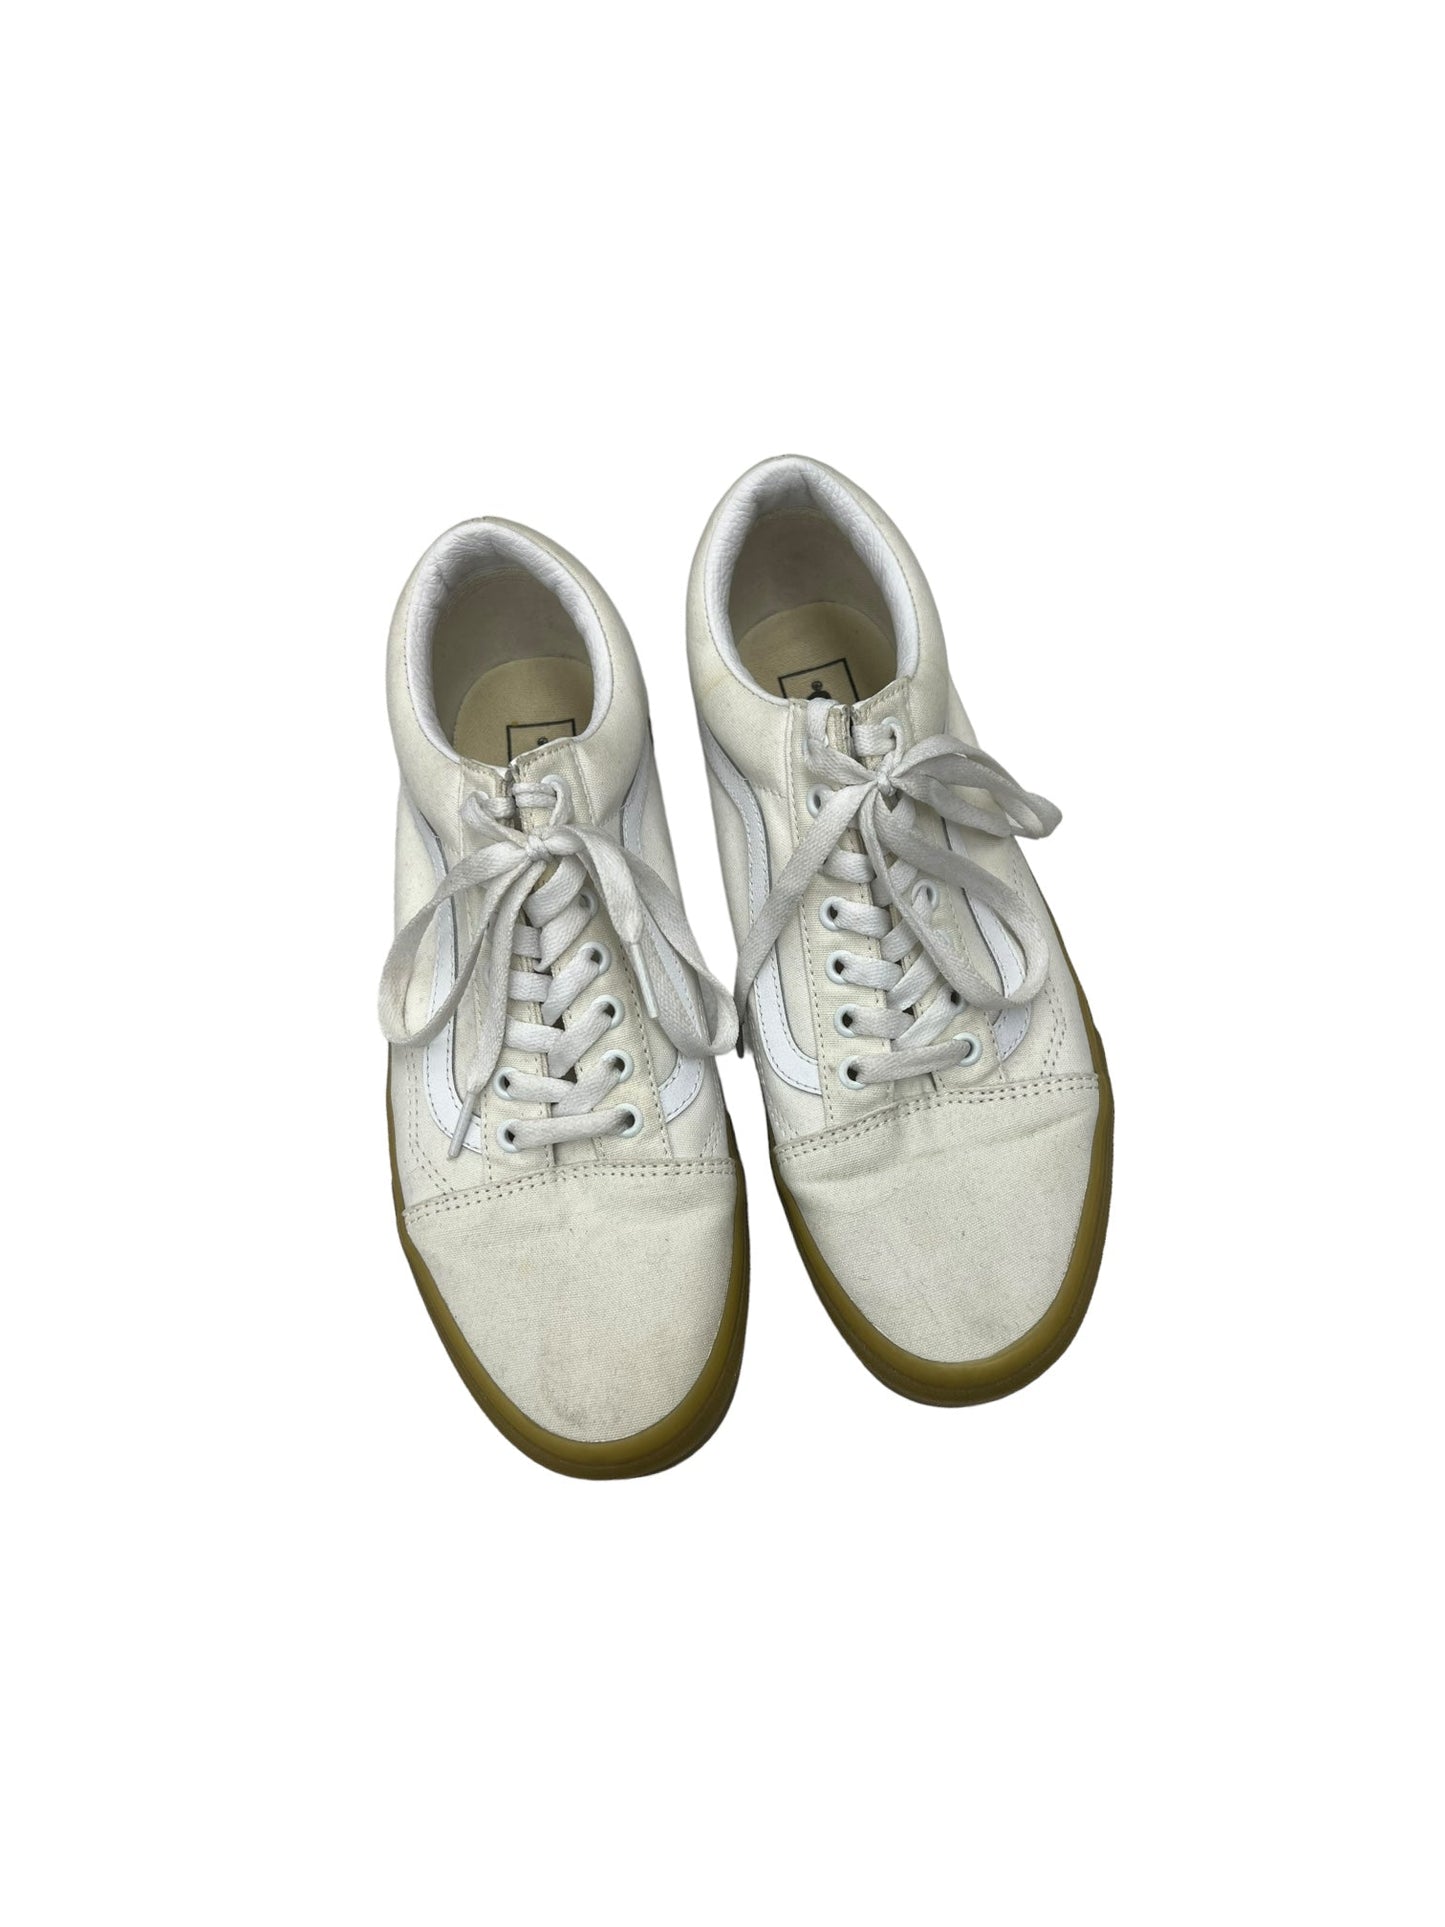 White Shoes Sneakers Vans, Size 11.5